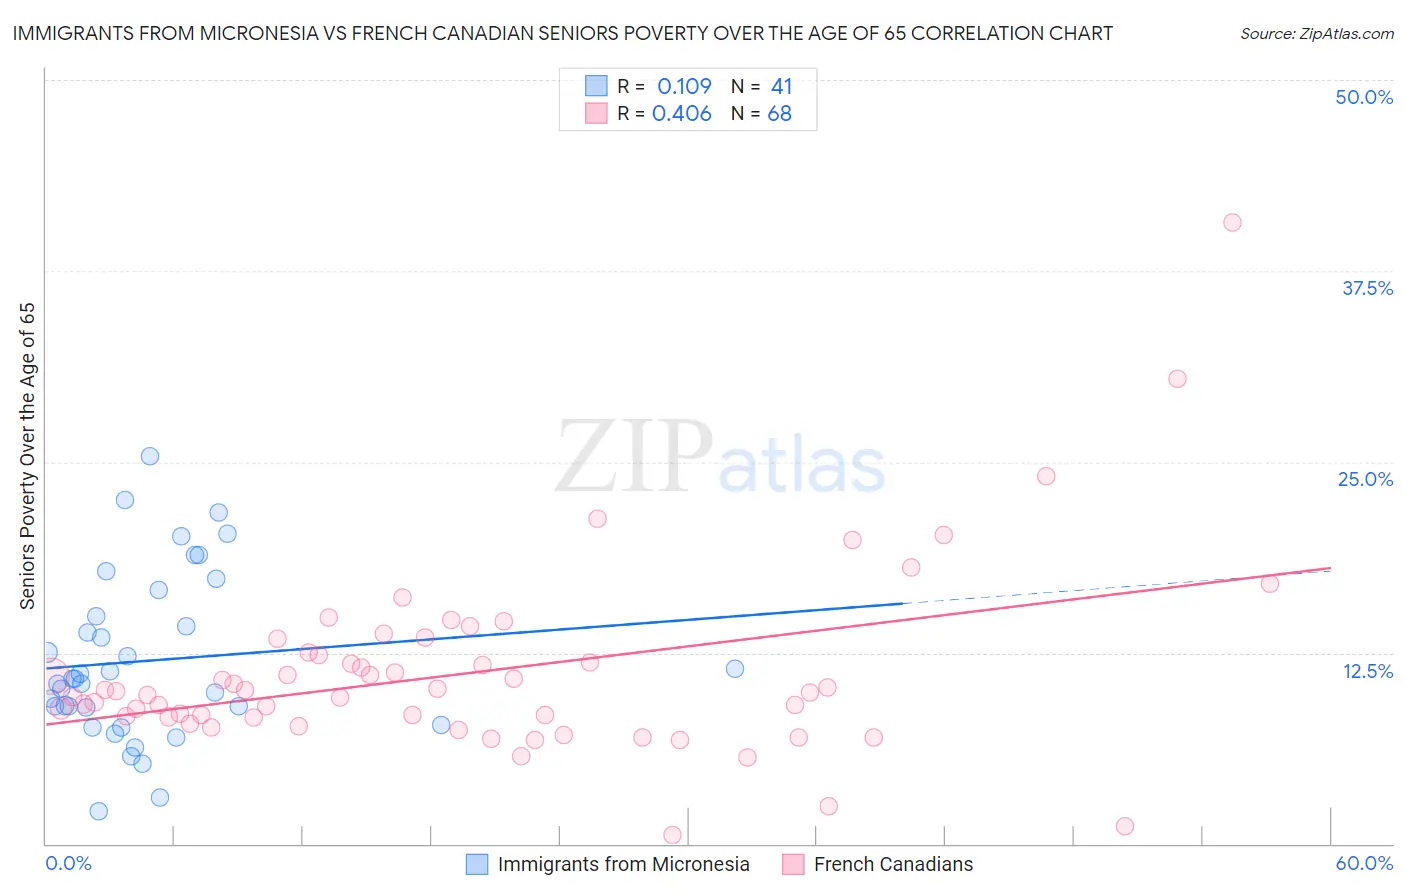 Immigrants from Micronesia vs French Canadian Seniors Poverty Over the Age of 65